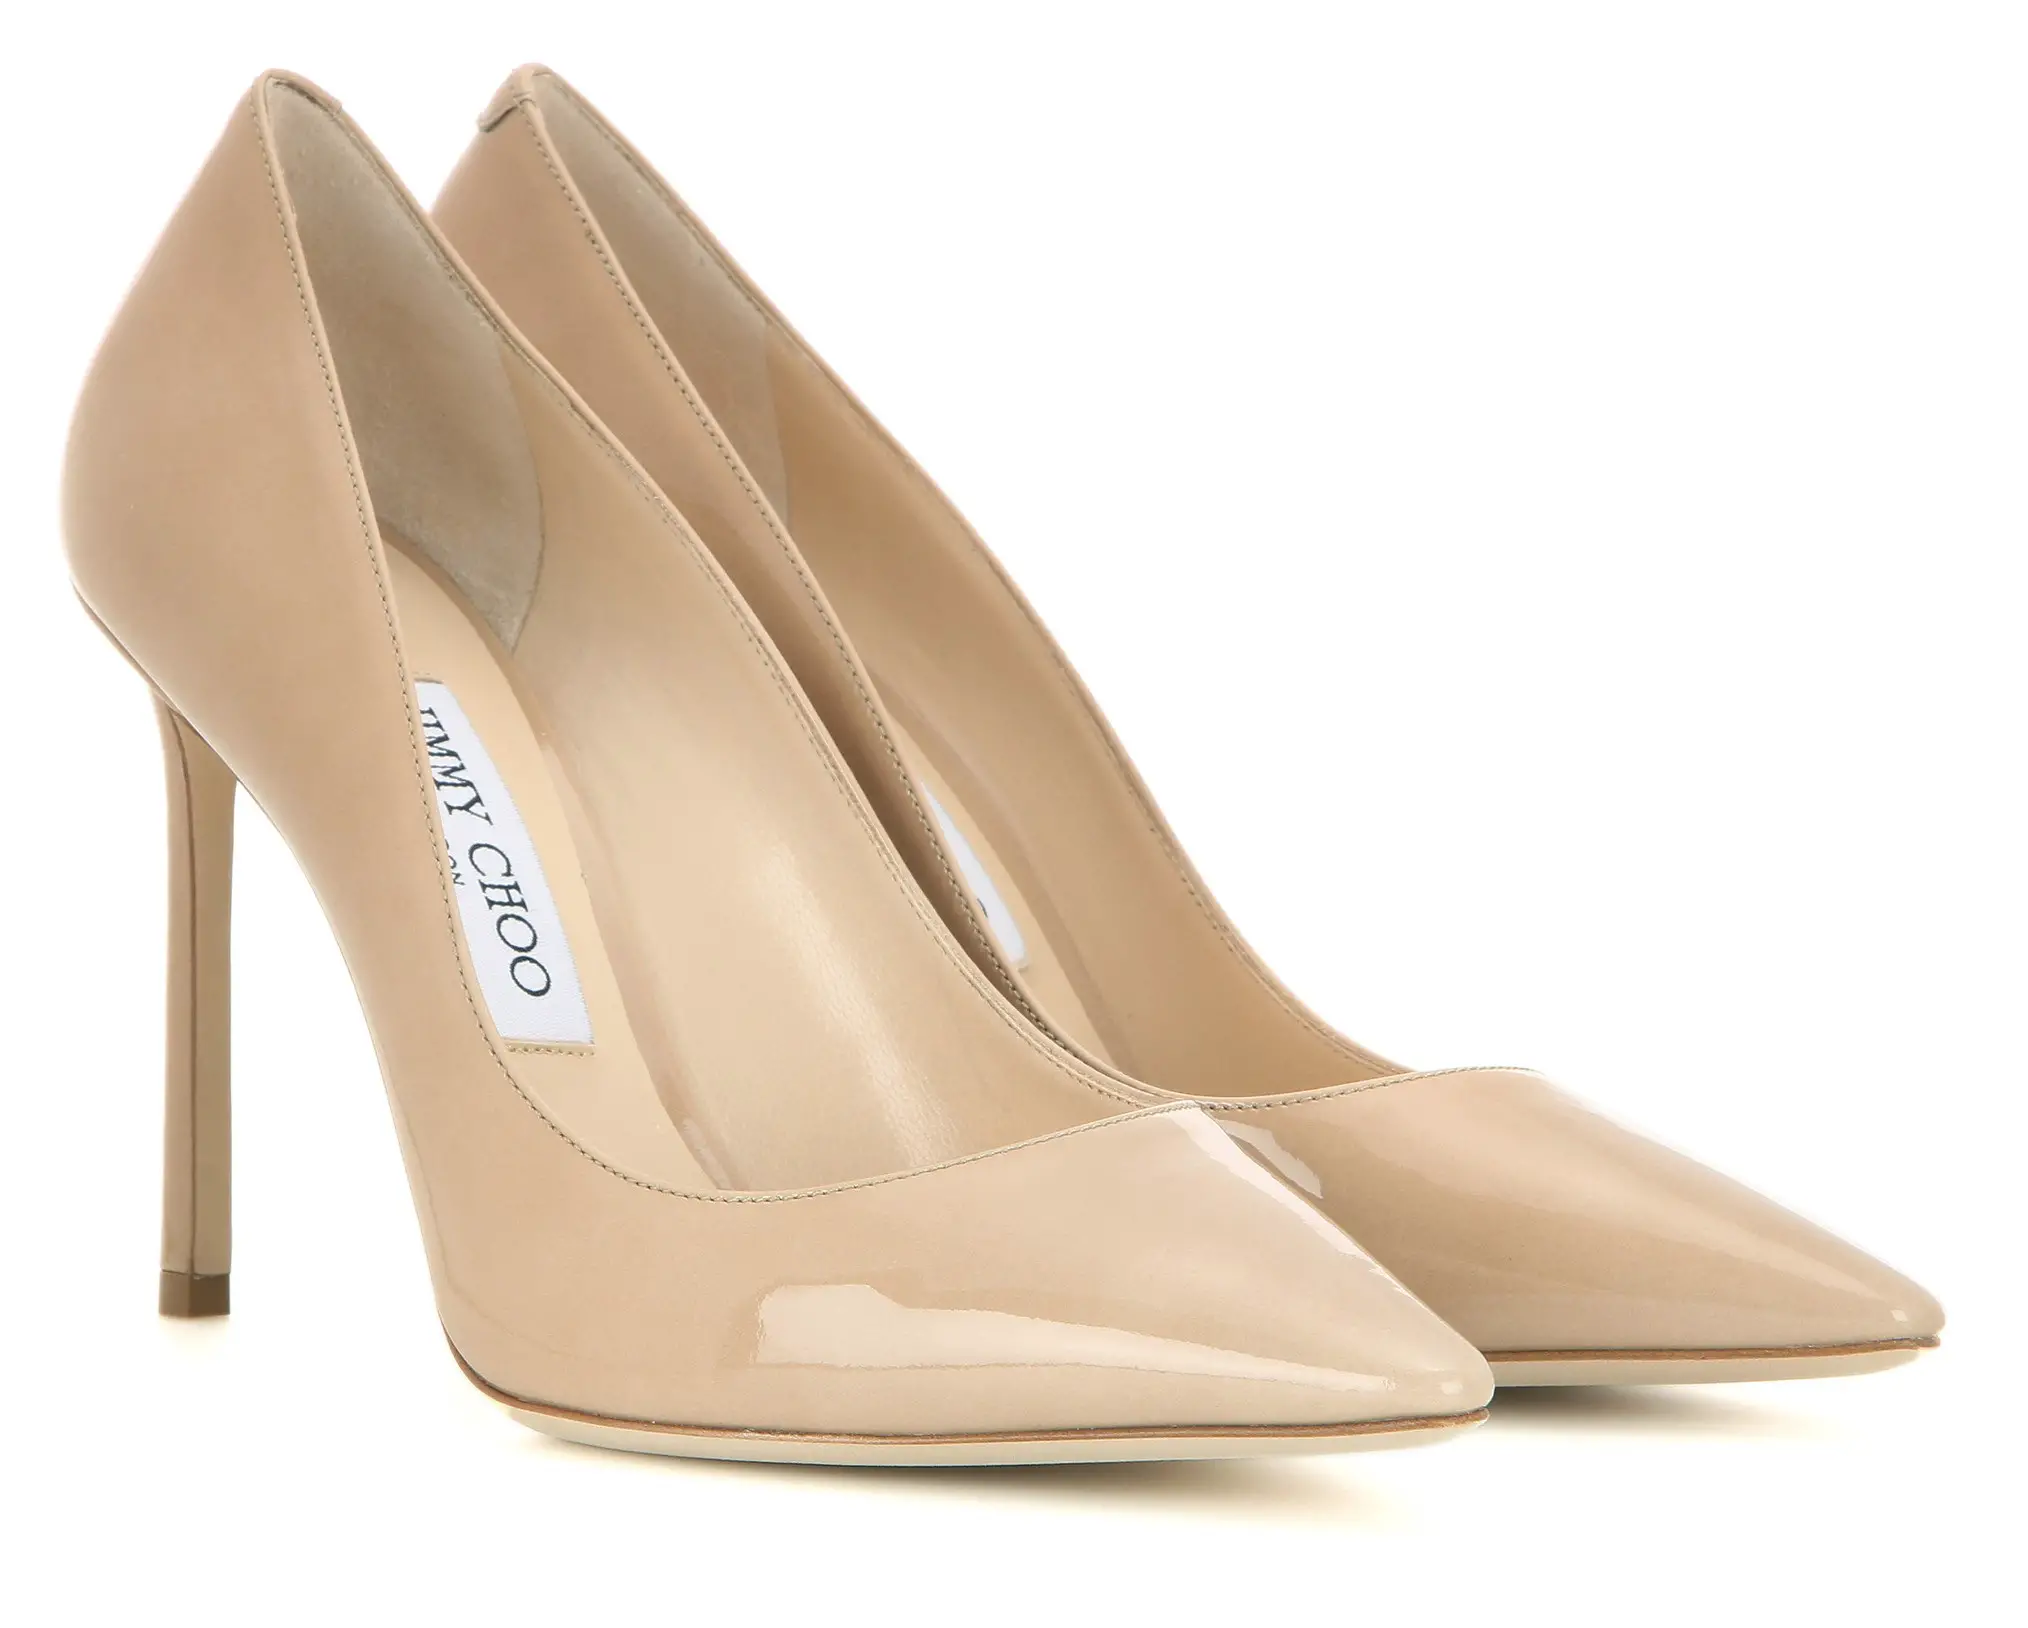 The Duchess of cambridge wore Jimmy Choo Romy 100 Patent Leather pointy-toe pumps